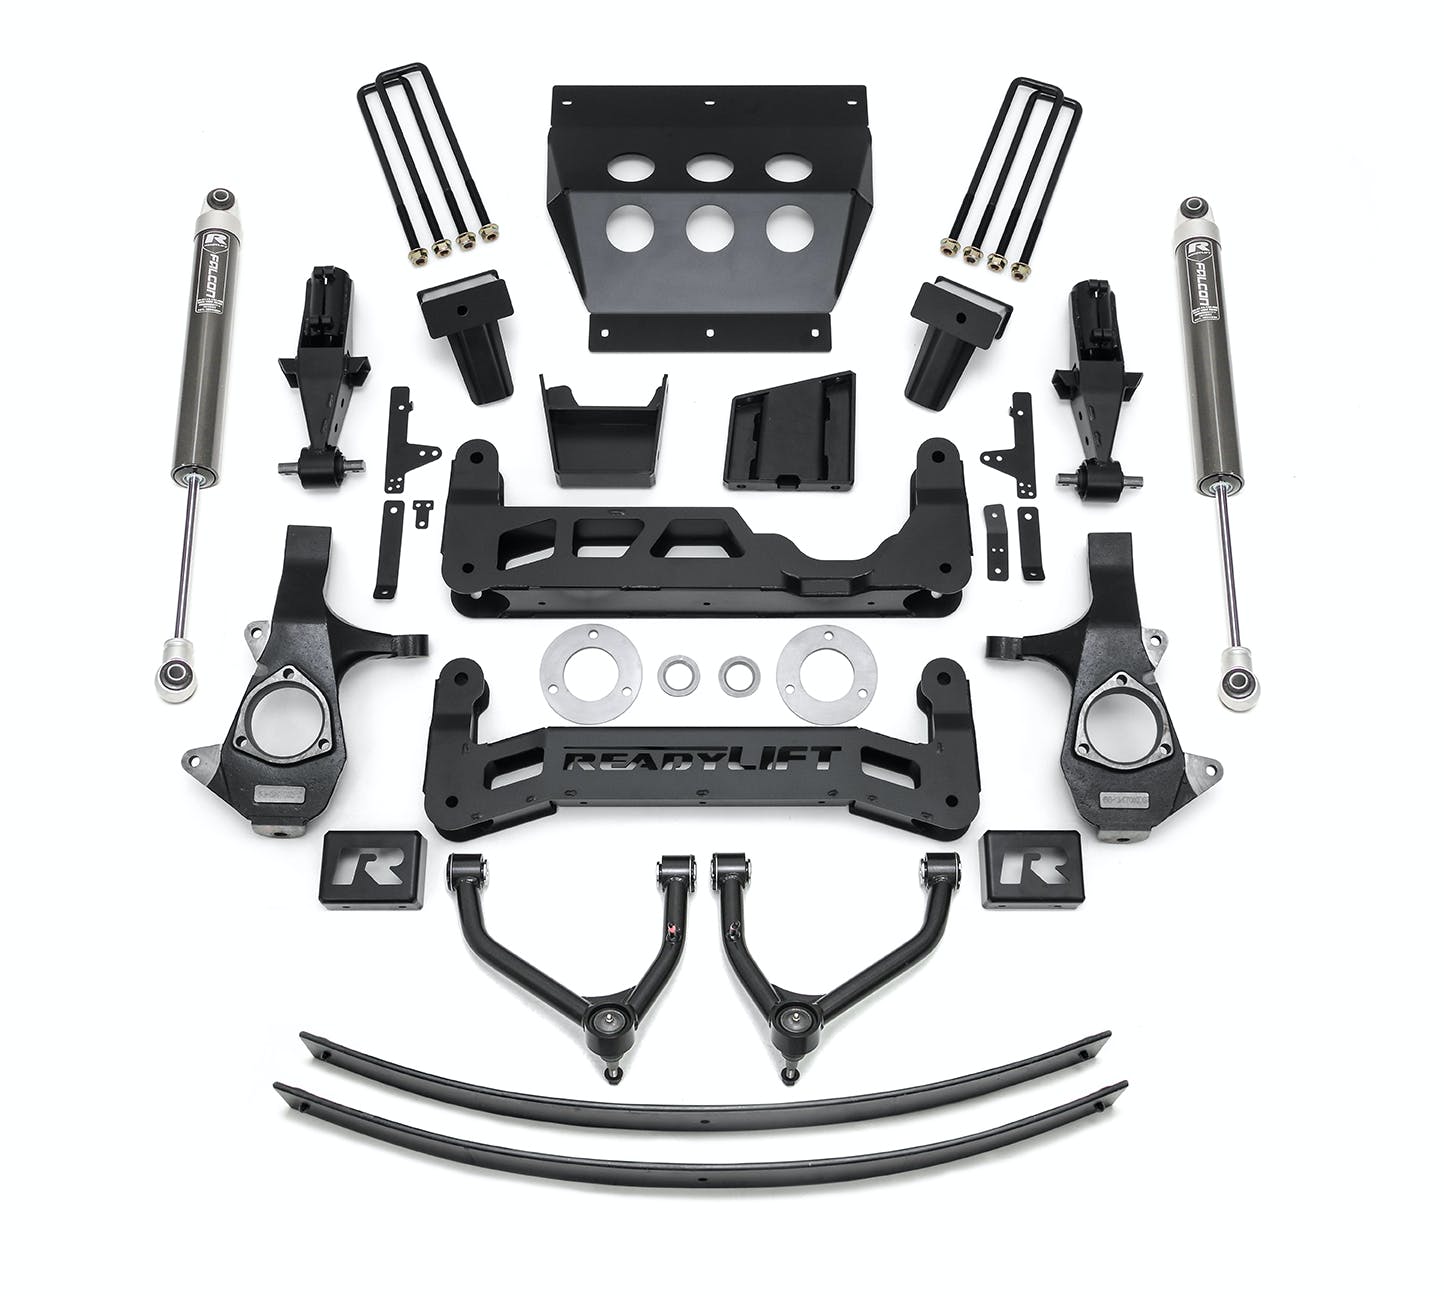 ReadyLIFT 44-34900 9" Big Lift Kit for Aluminum or Stamped Steel OE Upper Control Arms